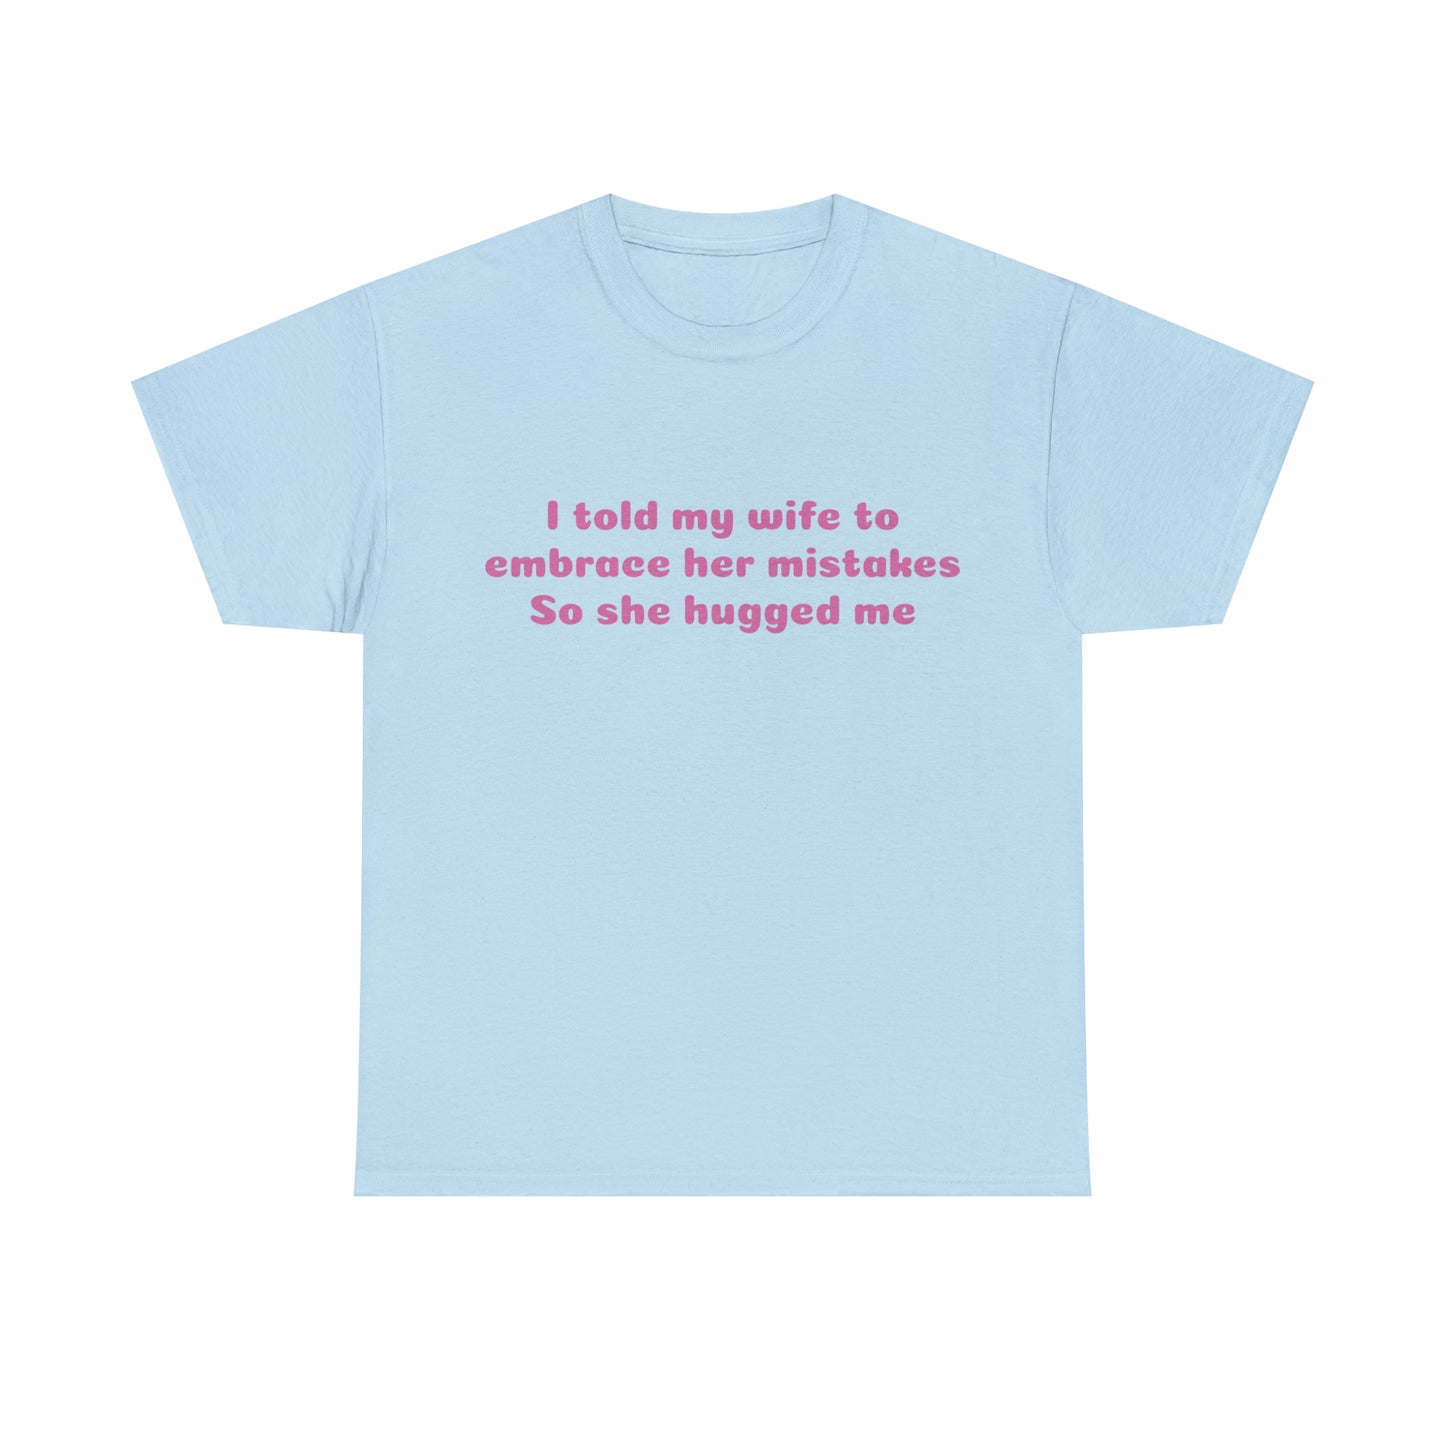 Custom Parody T-shirt, I told my wife to embrace her mistakes, So she hugged me shirt design